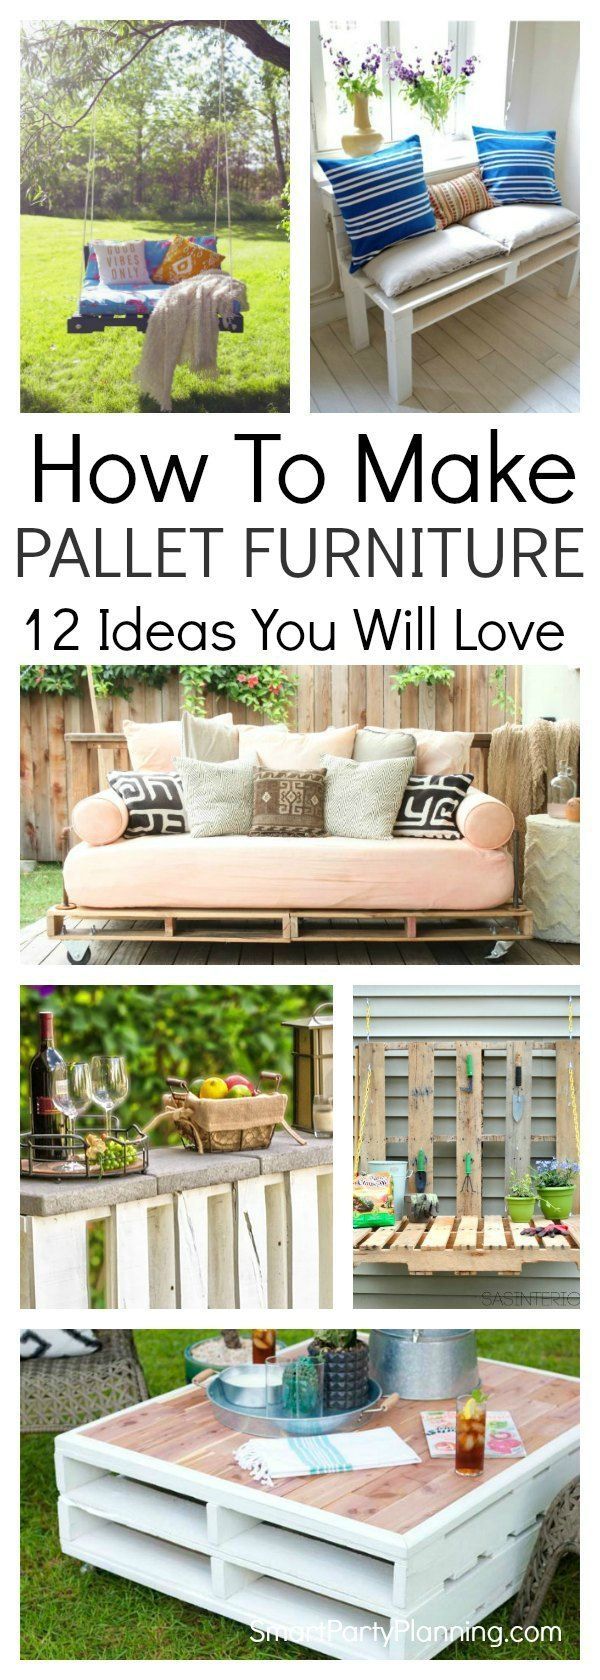 How To Make Pallet Furniture. 12 Ideas You Will Love -   14 diy projects With Pallets how to make ideas